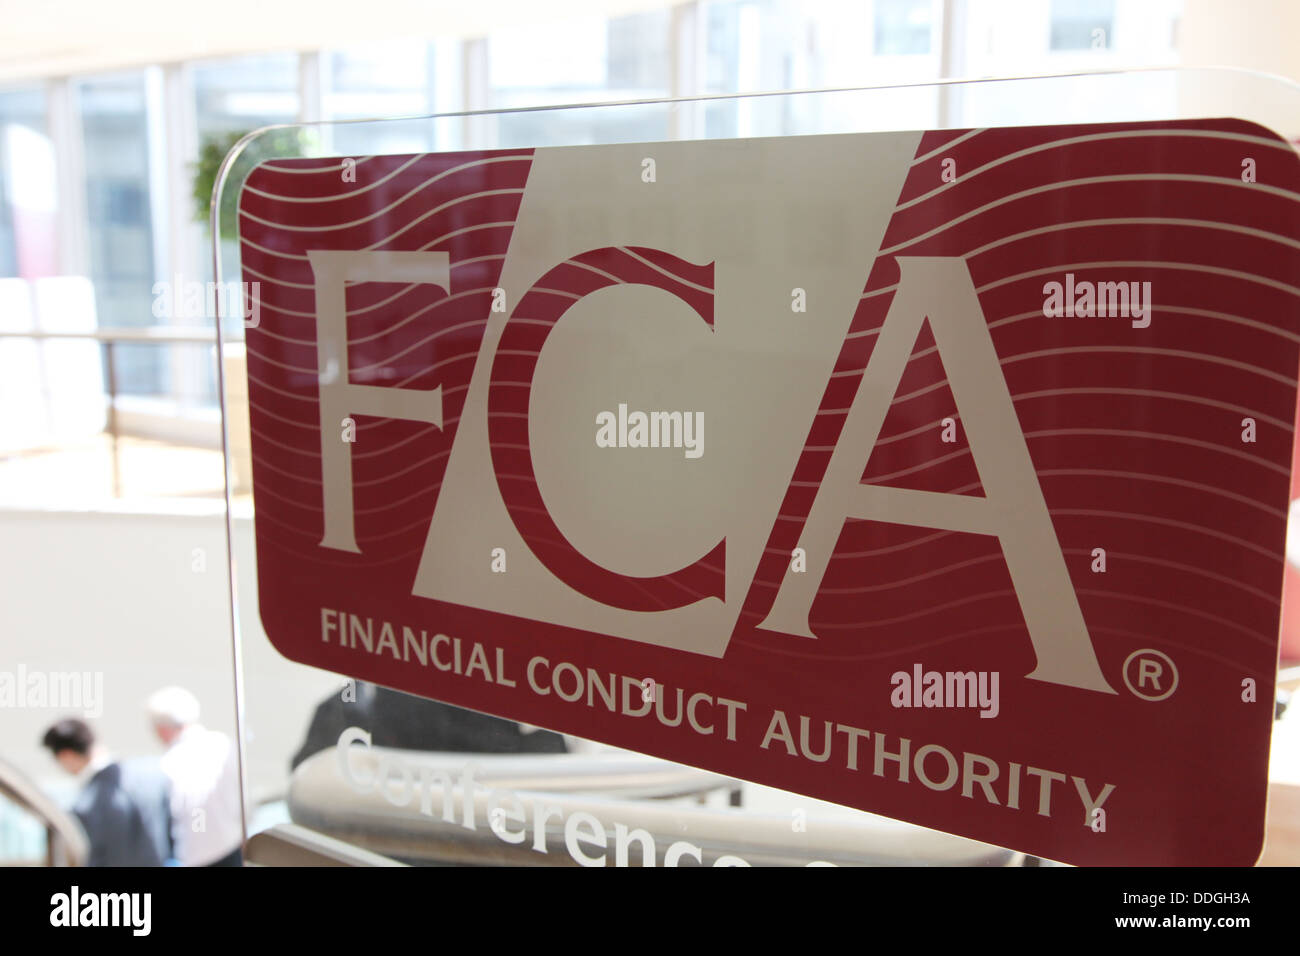 Offices of the FCA, Financial Conduct Authority at Canary Wharf, London (formerly FSA). Stock Photo